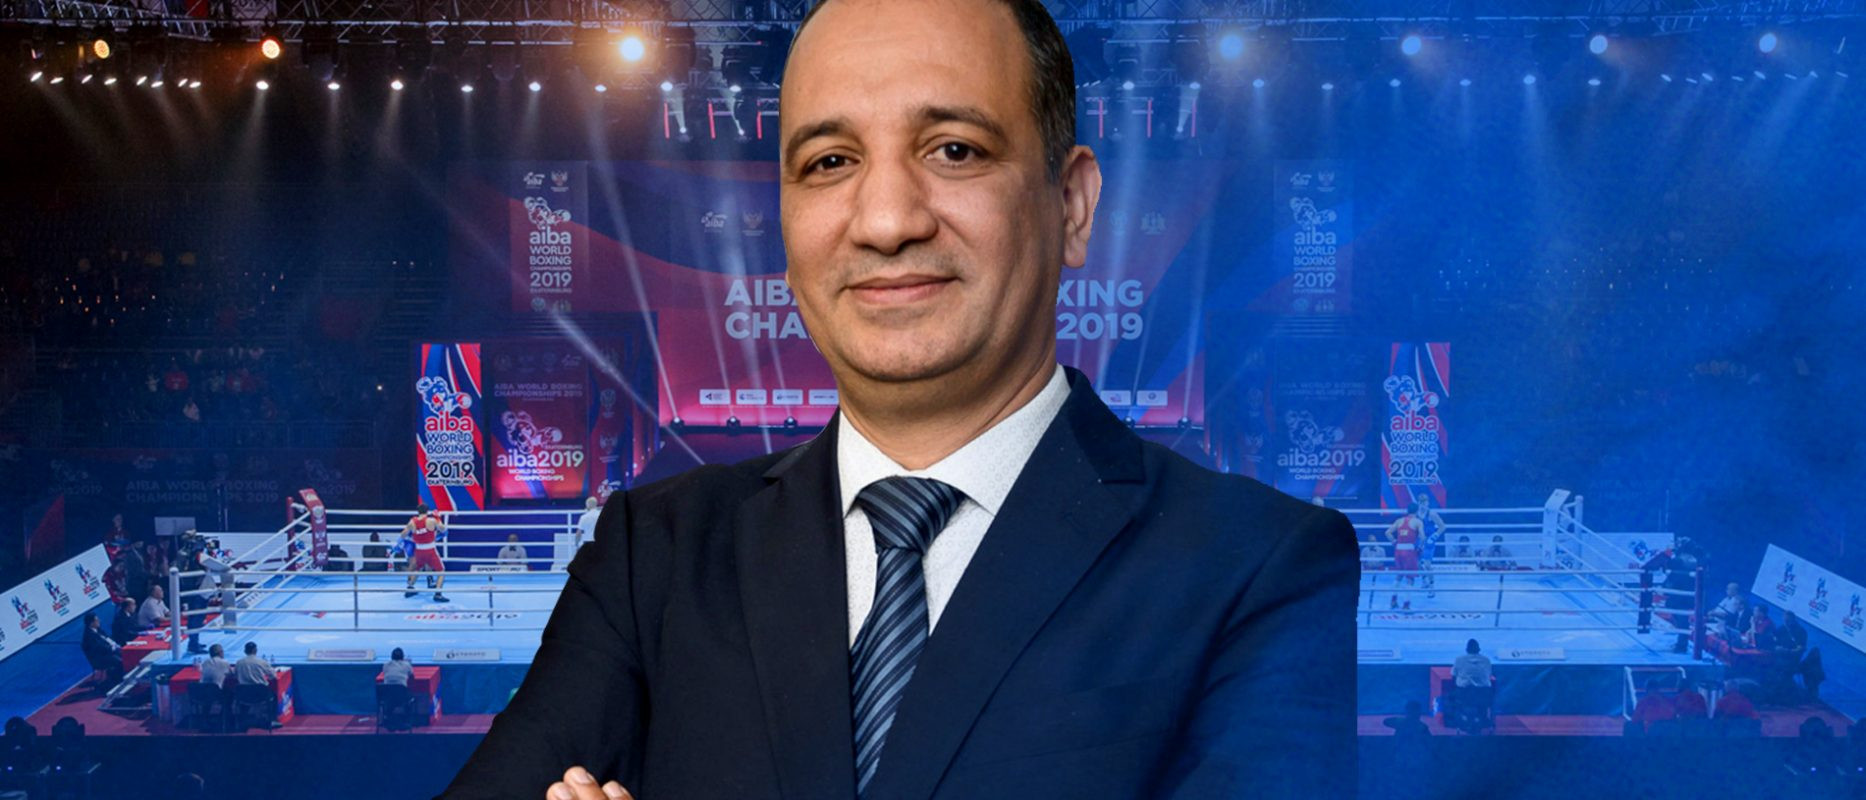 AIBA has been led by an Interim President, Morocco's Mohamed Moustahsane, for the past 18 months ©AIBA